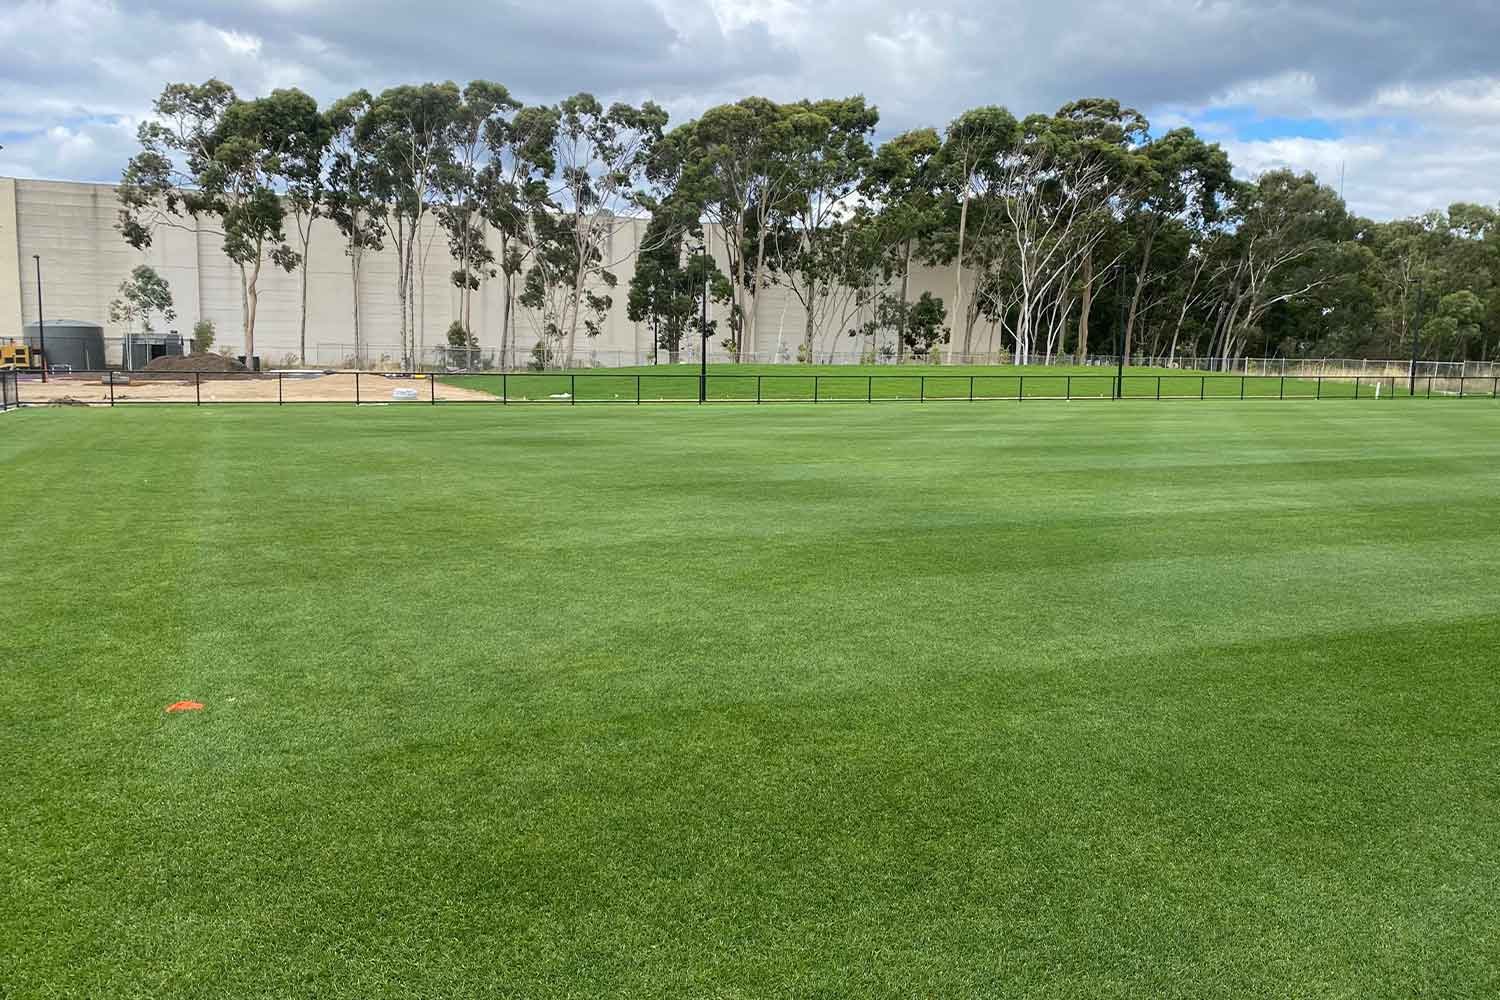 Panoamic view of an AFL sports field hybrid turf surface